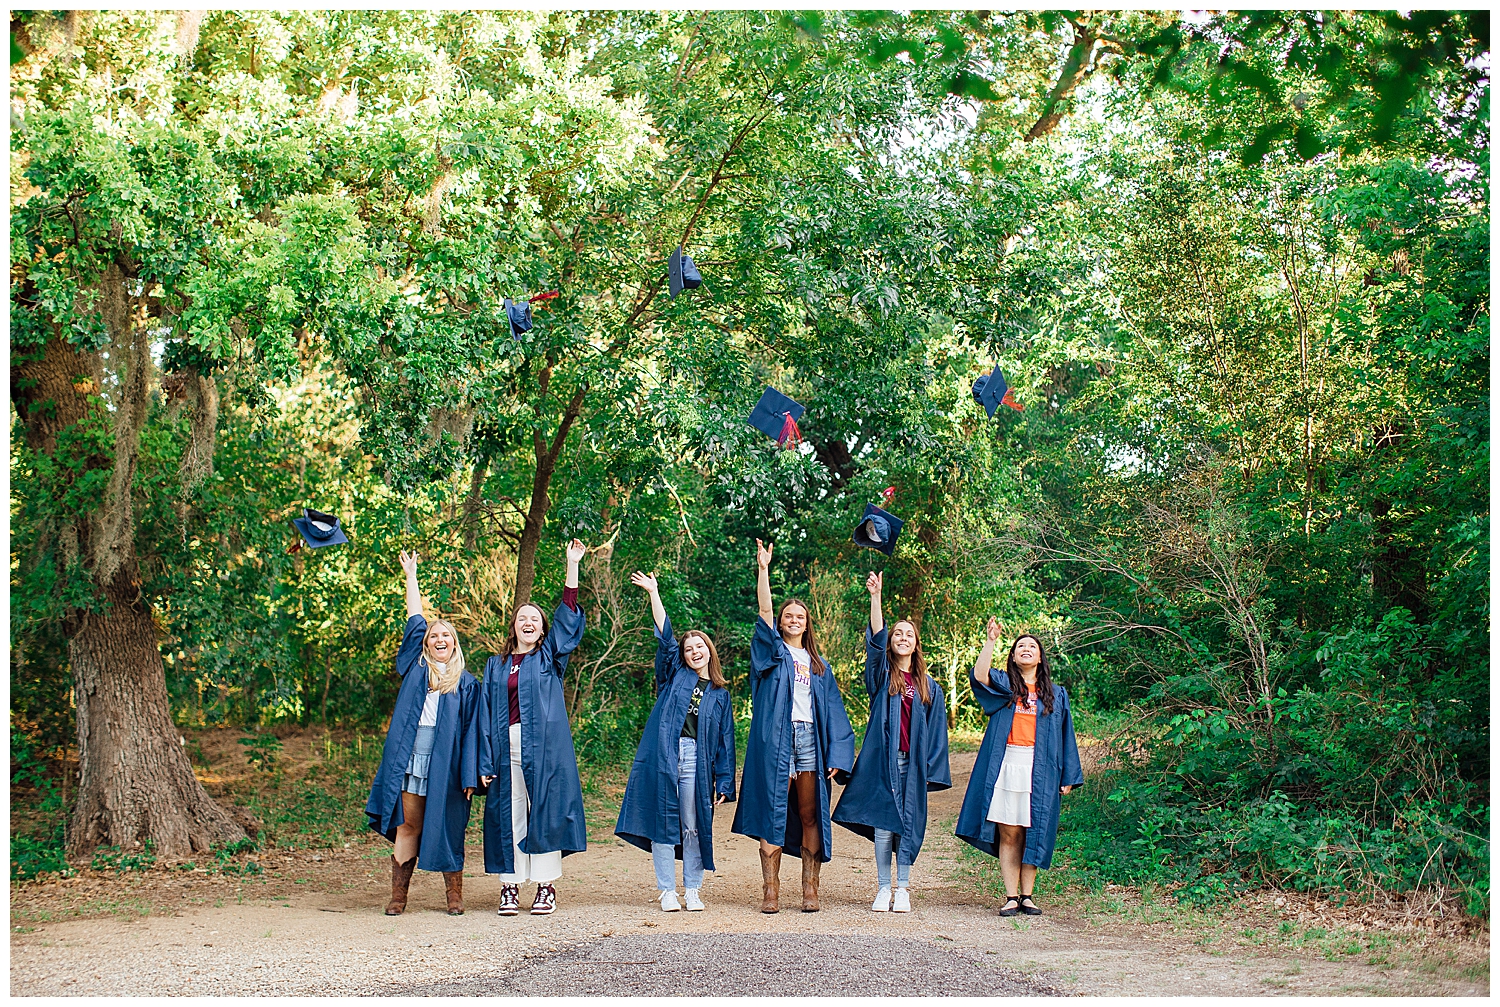 high school seniors in navy cap and gown for cap and gown senior pictures Houston, Texas